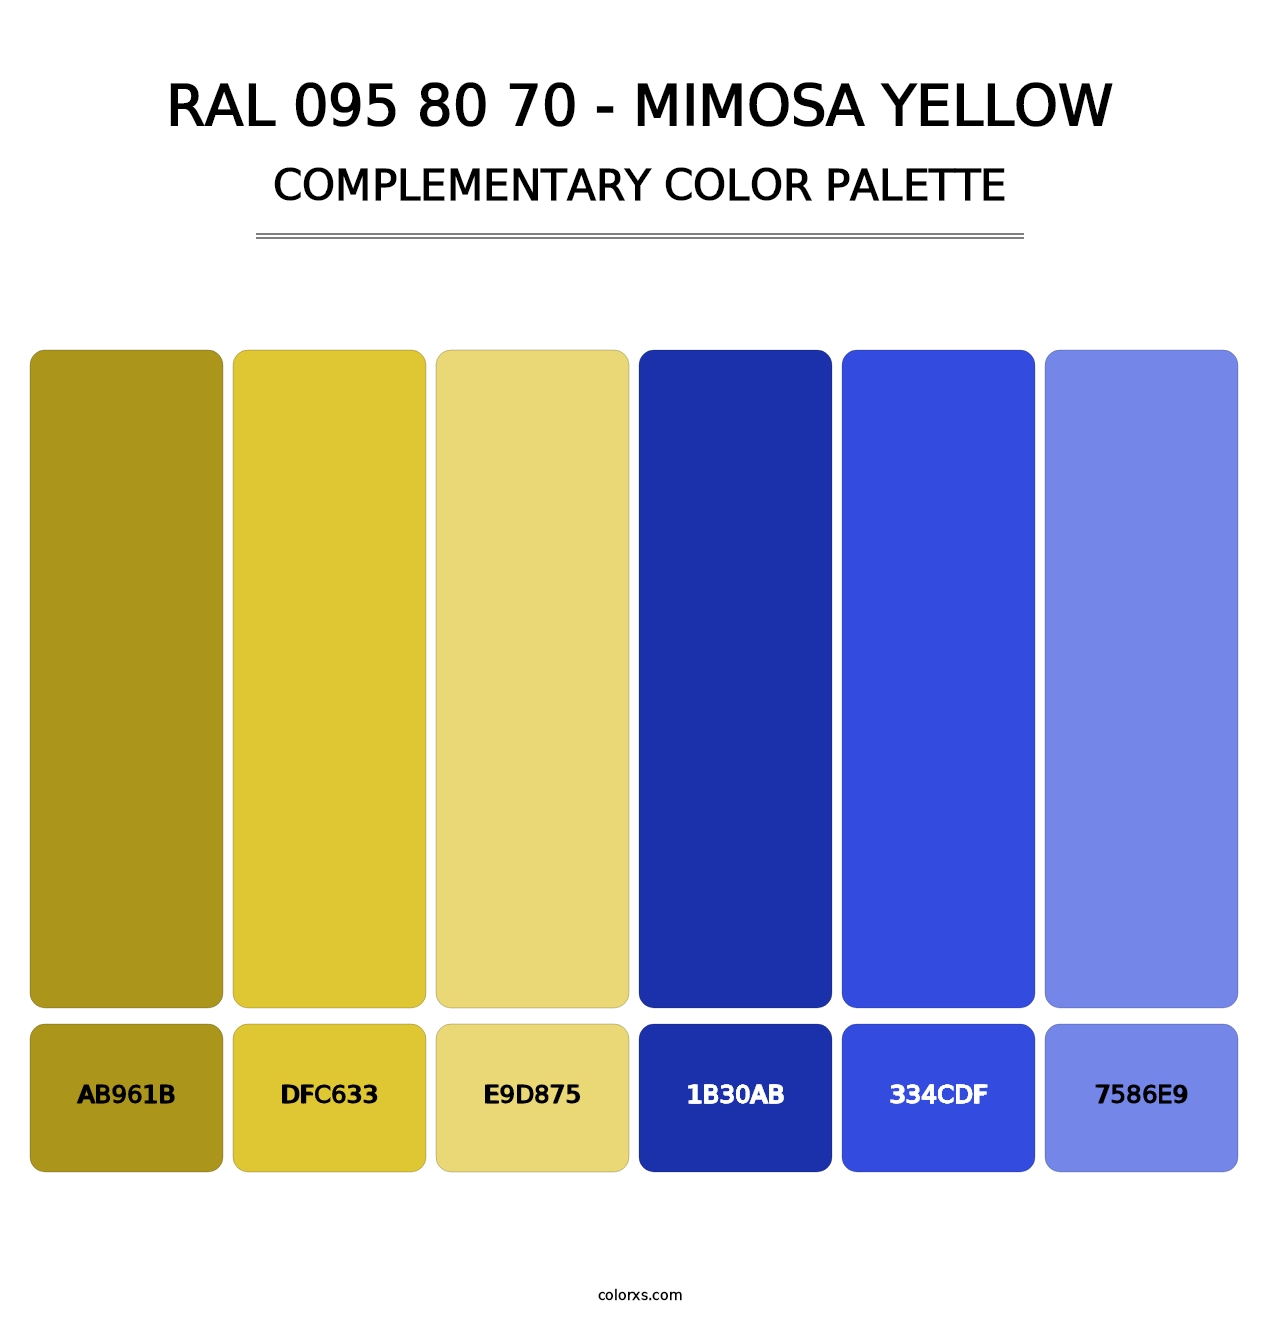 RAL 095 80 70 - Mimosa Yellow - Complementary Color Palette